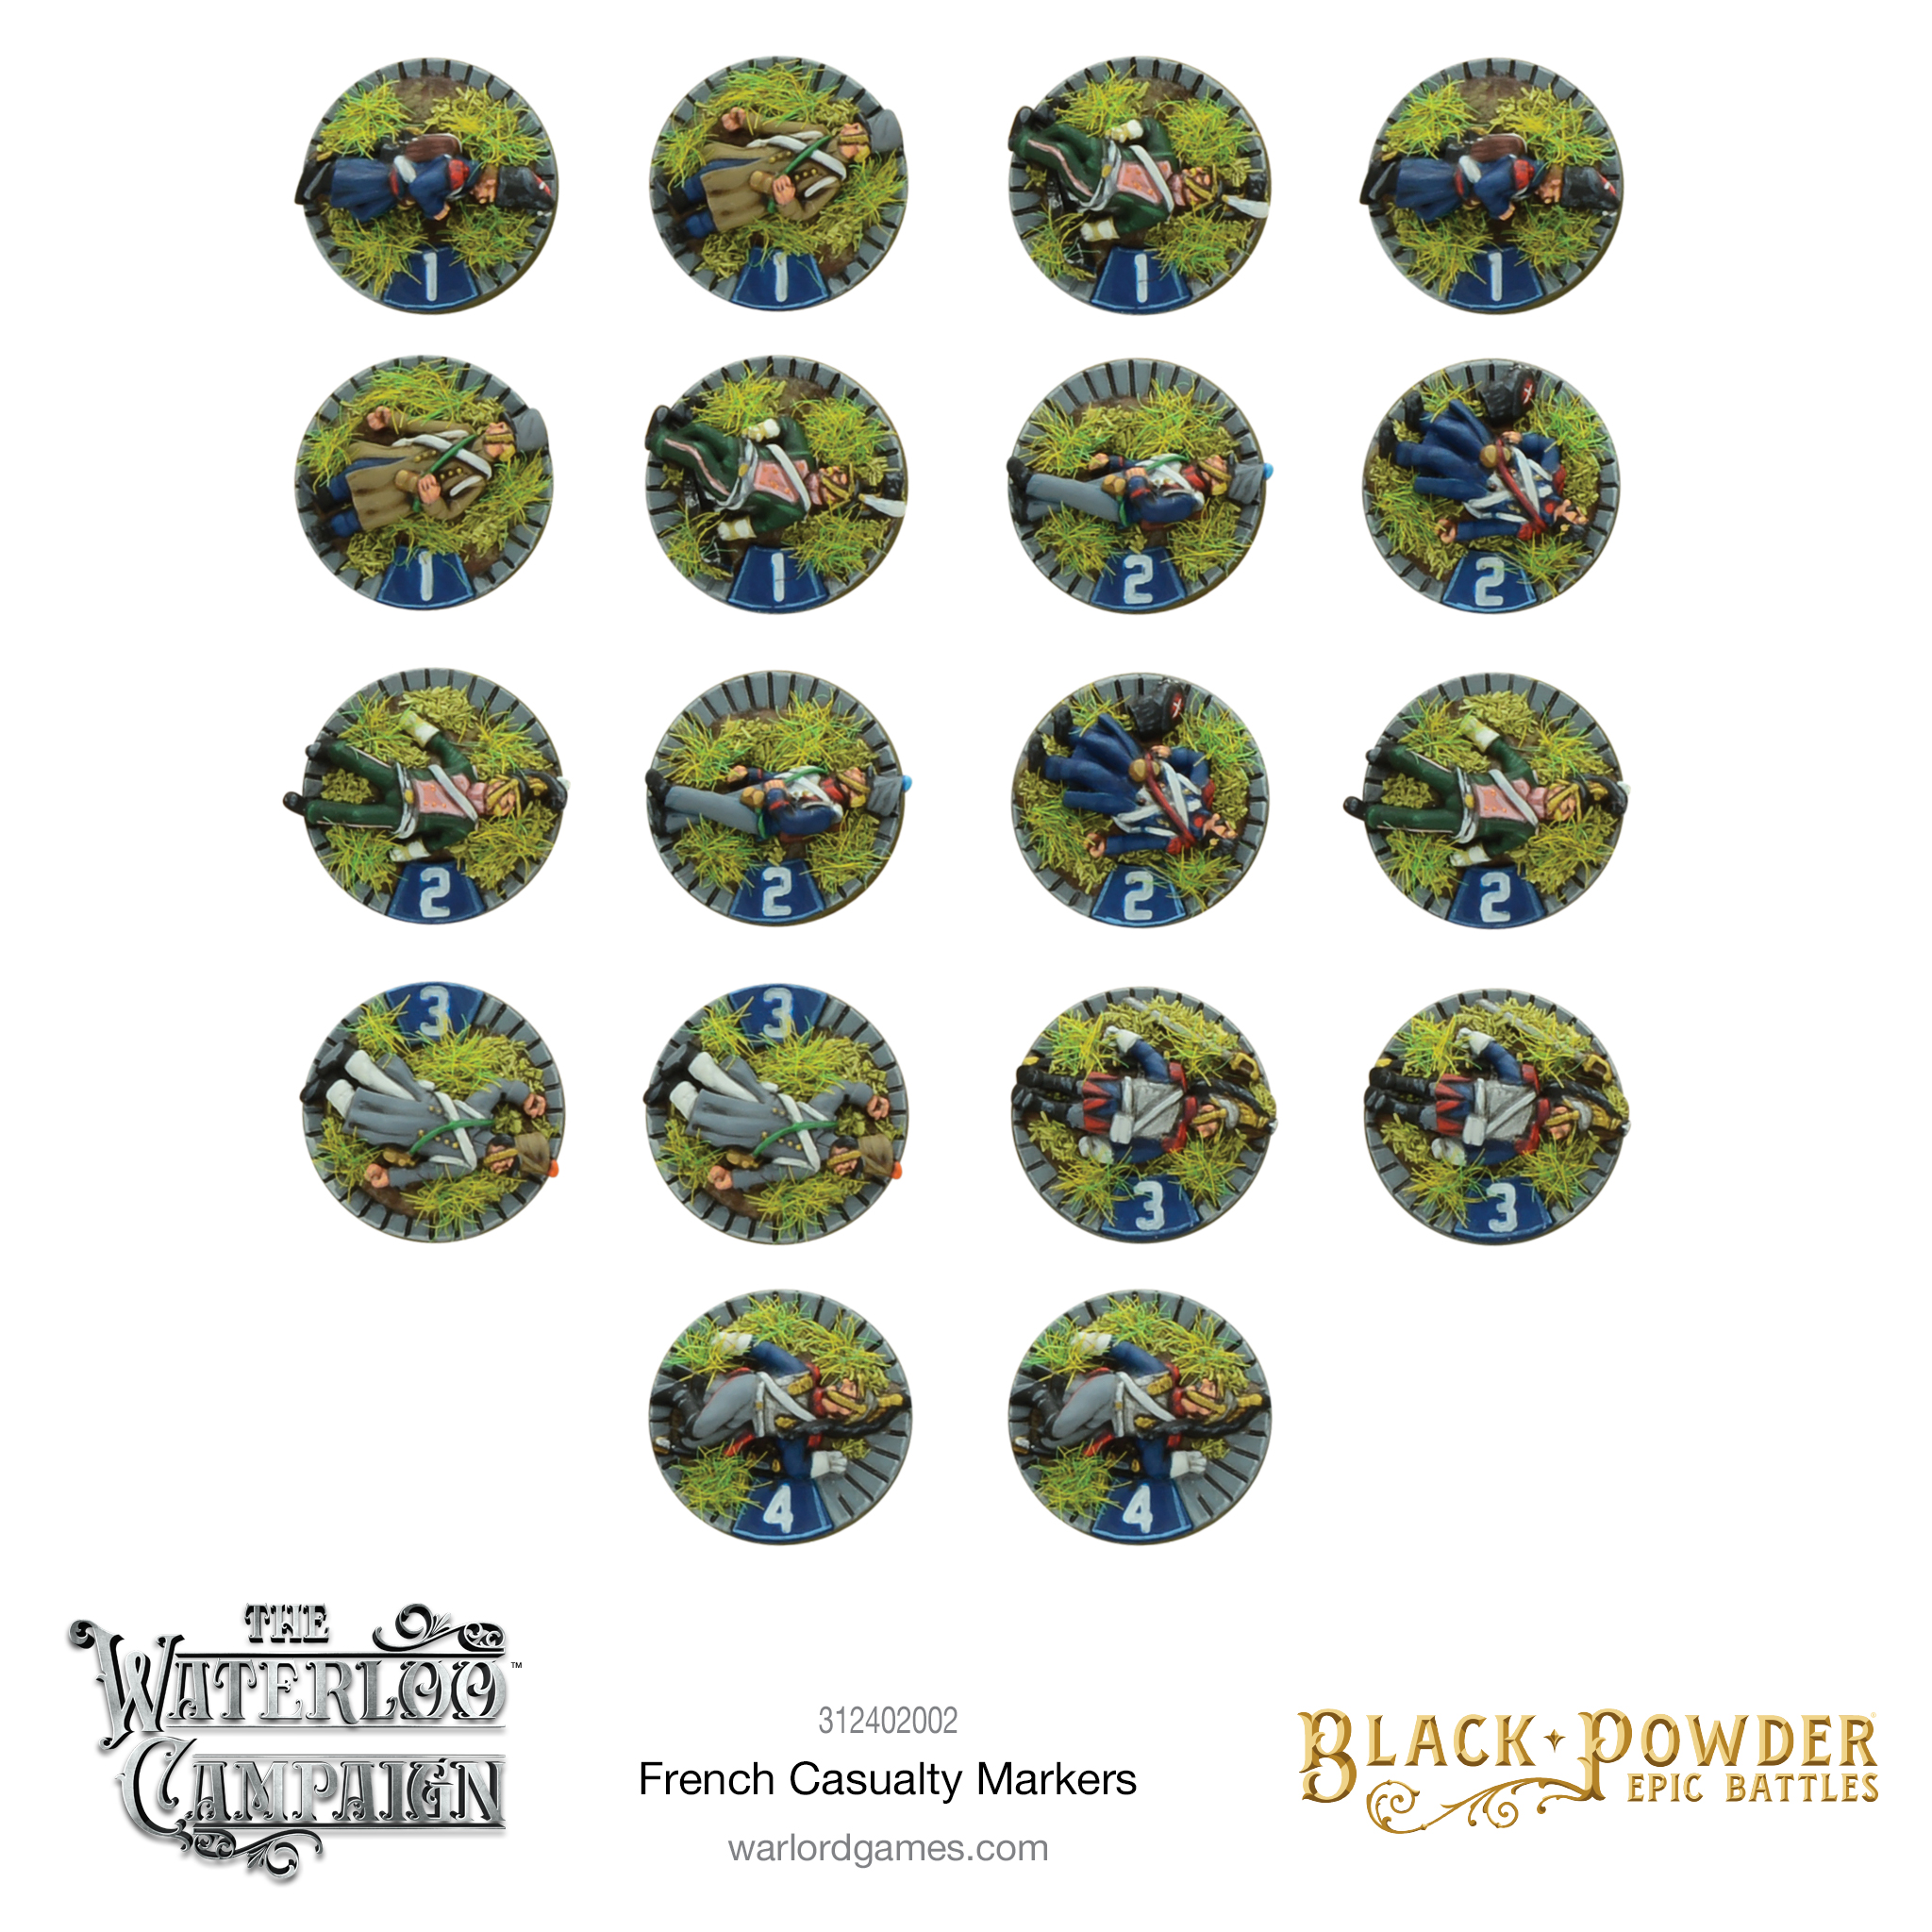 French Casualty Markers - Black Powder Epic Battles